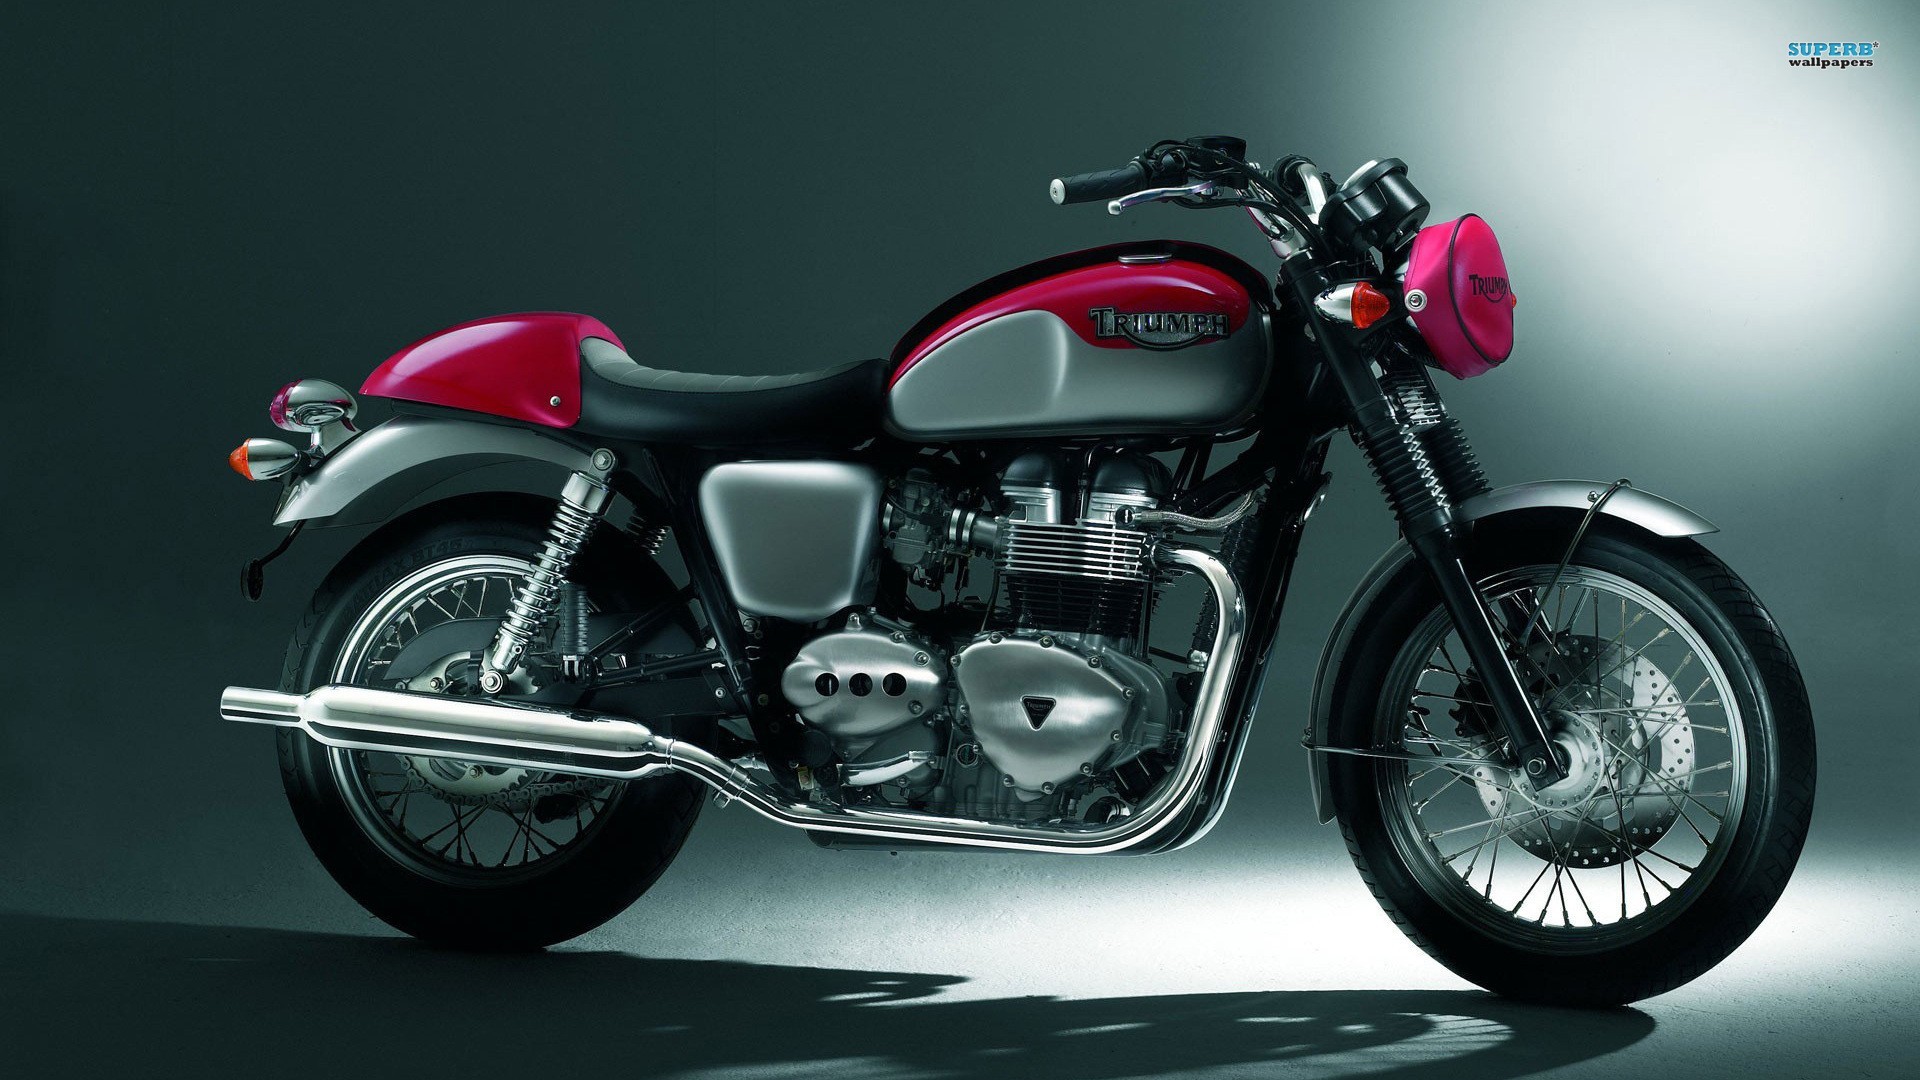 Triumph Motorcycle Wallpaper Related Keywords & Suggestions ...